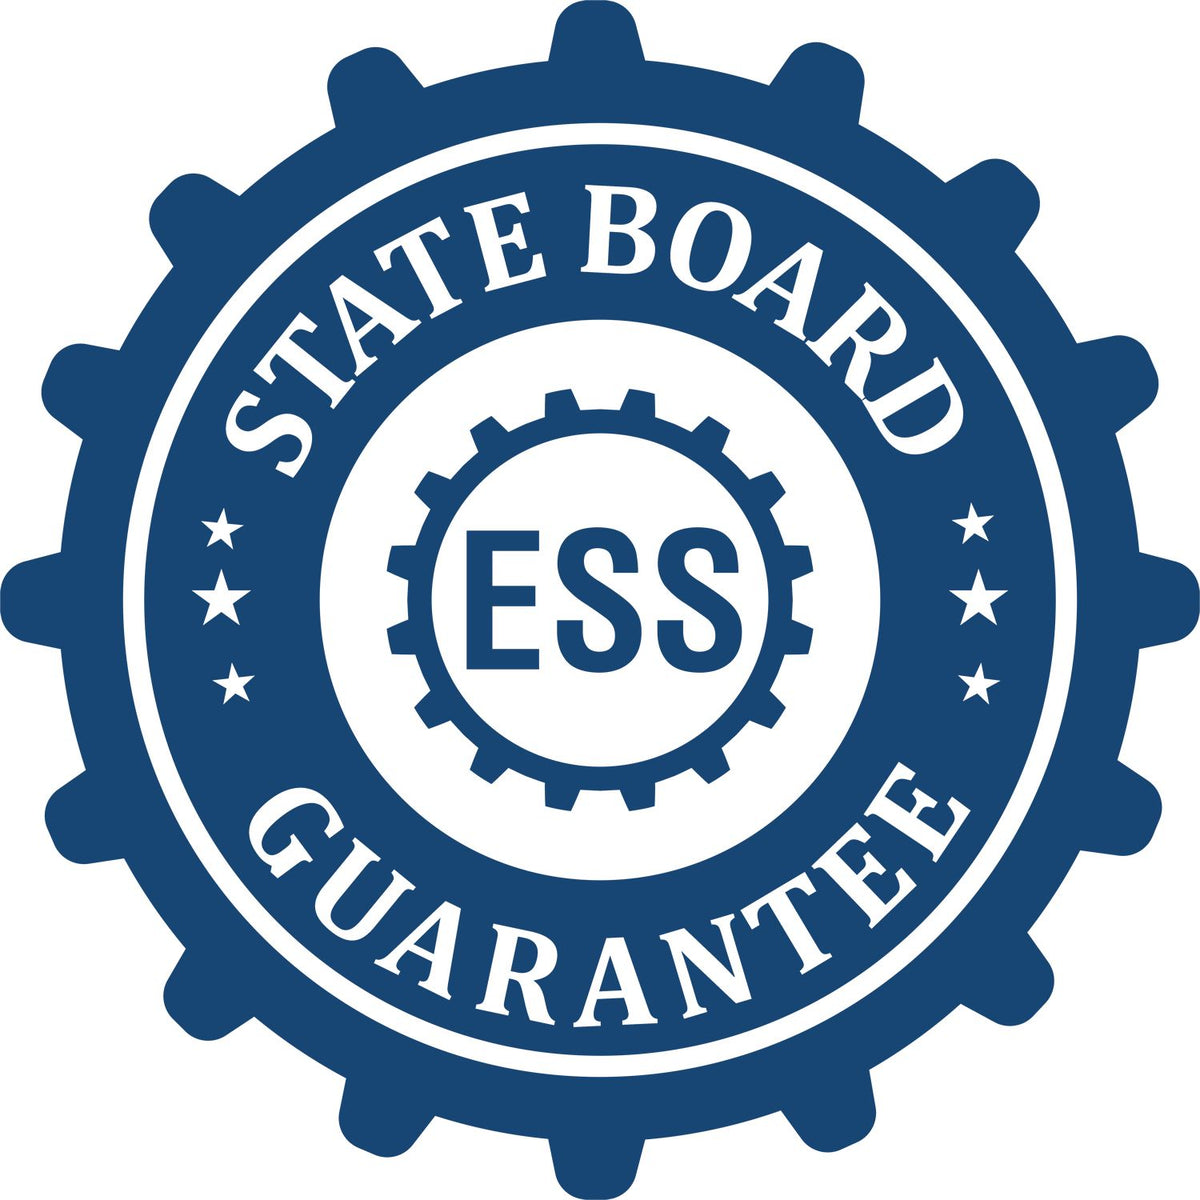 An emblem in a gear shape illustrating a state board guarantee for the North Dakota Landscape Architectural Seal Stamp product.